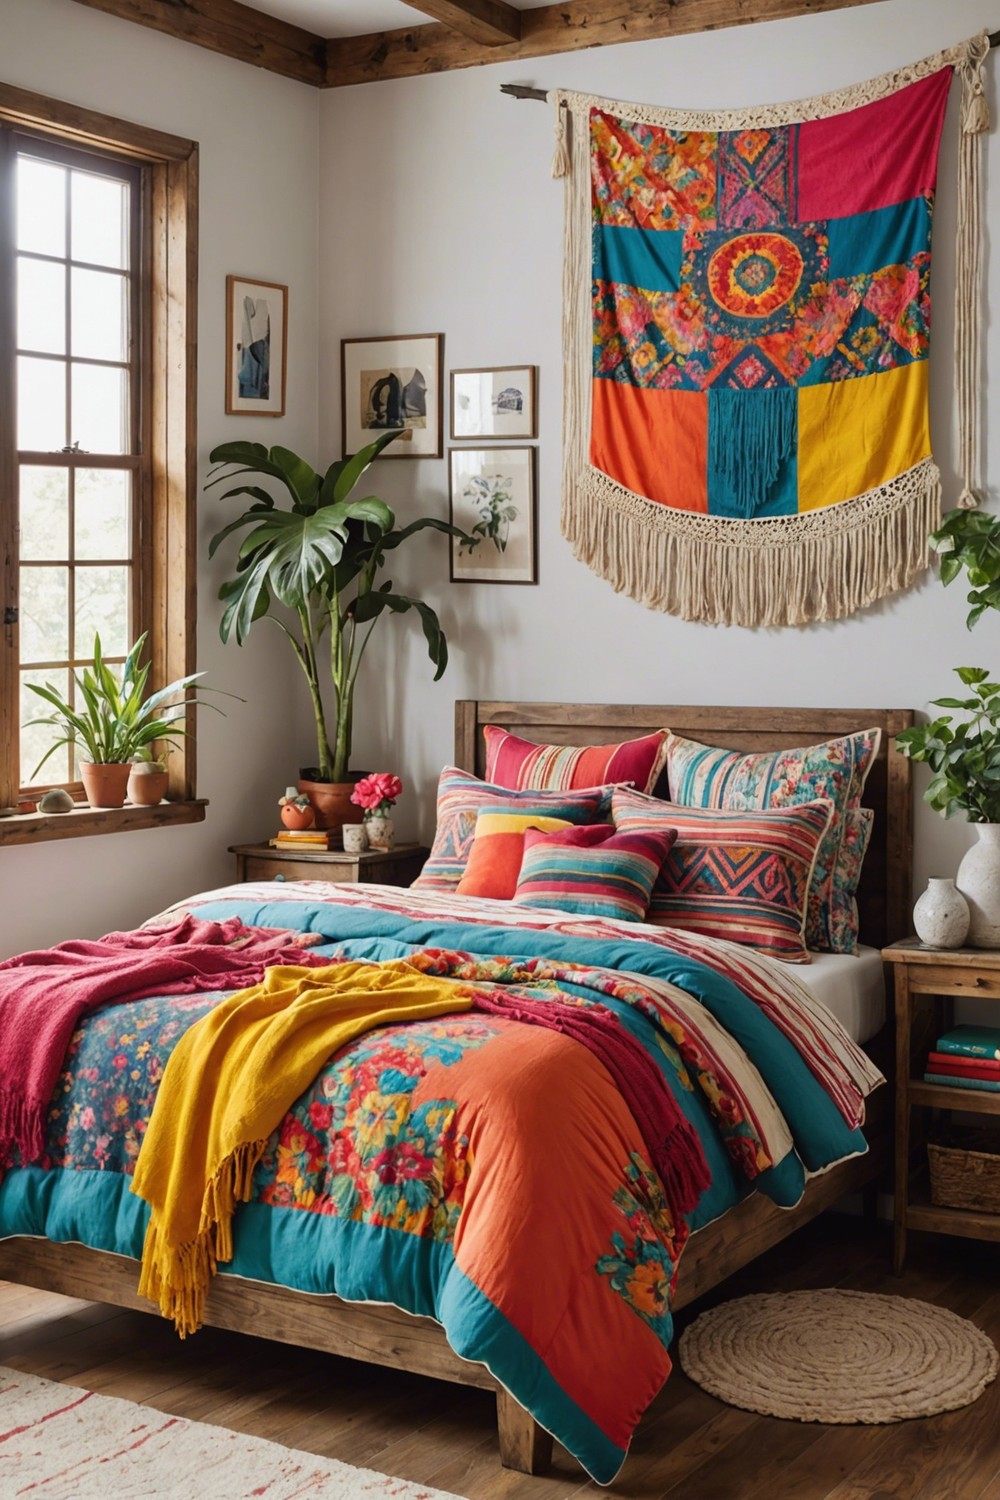 Vibrant Colored Bedding In Clashing Patterns